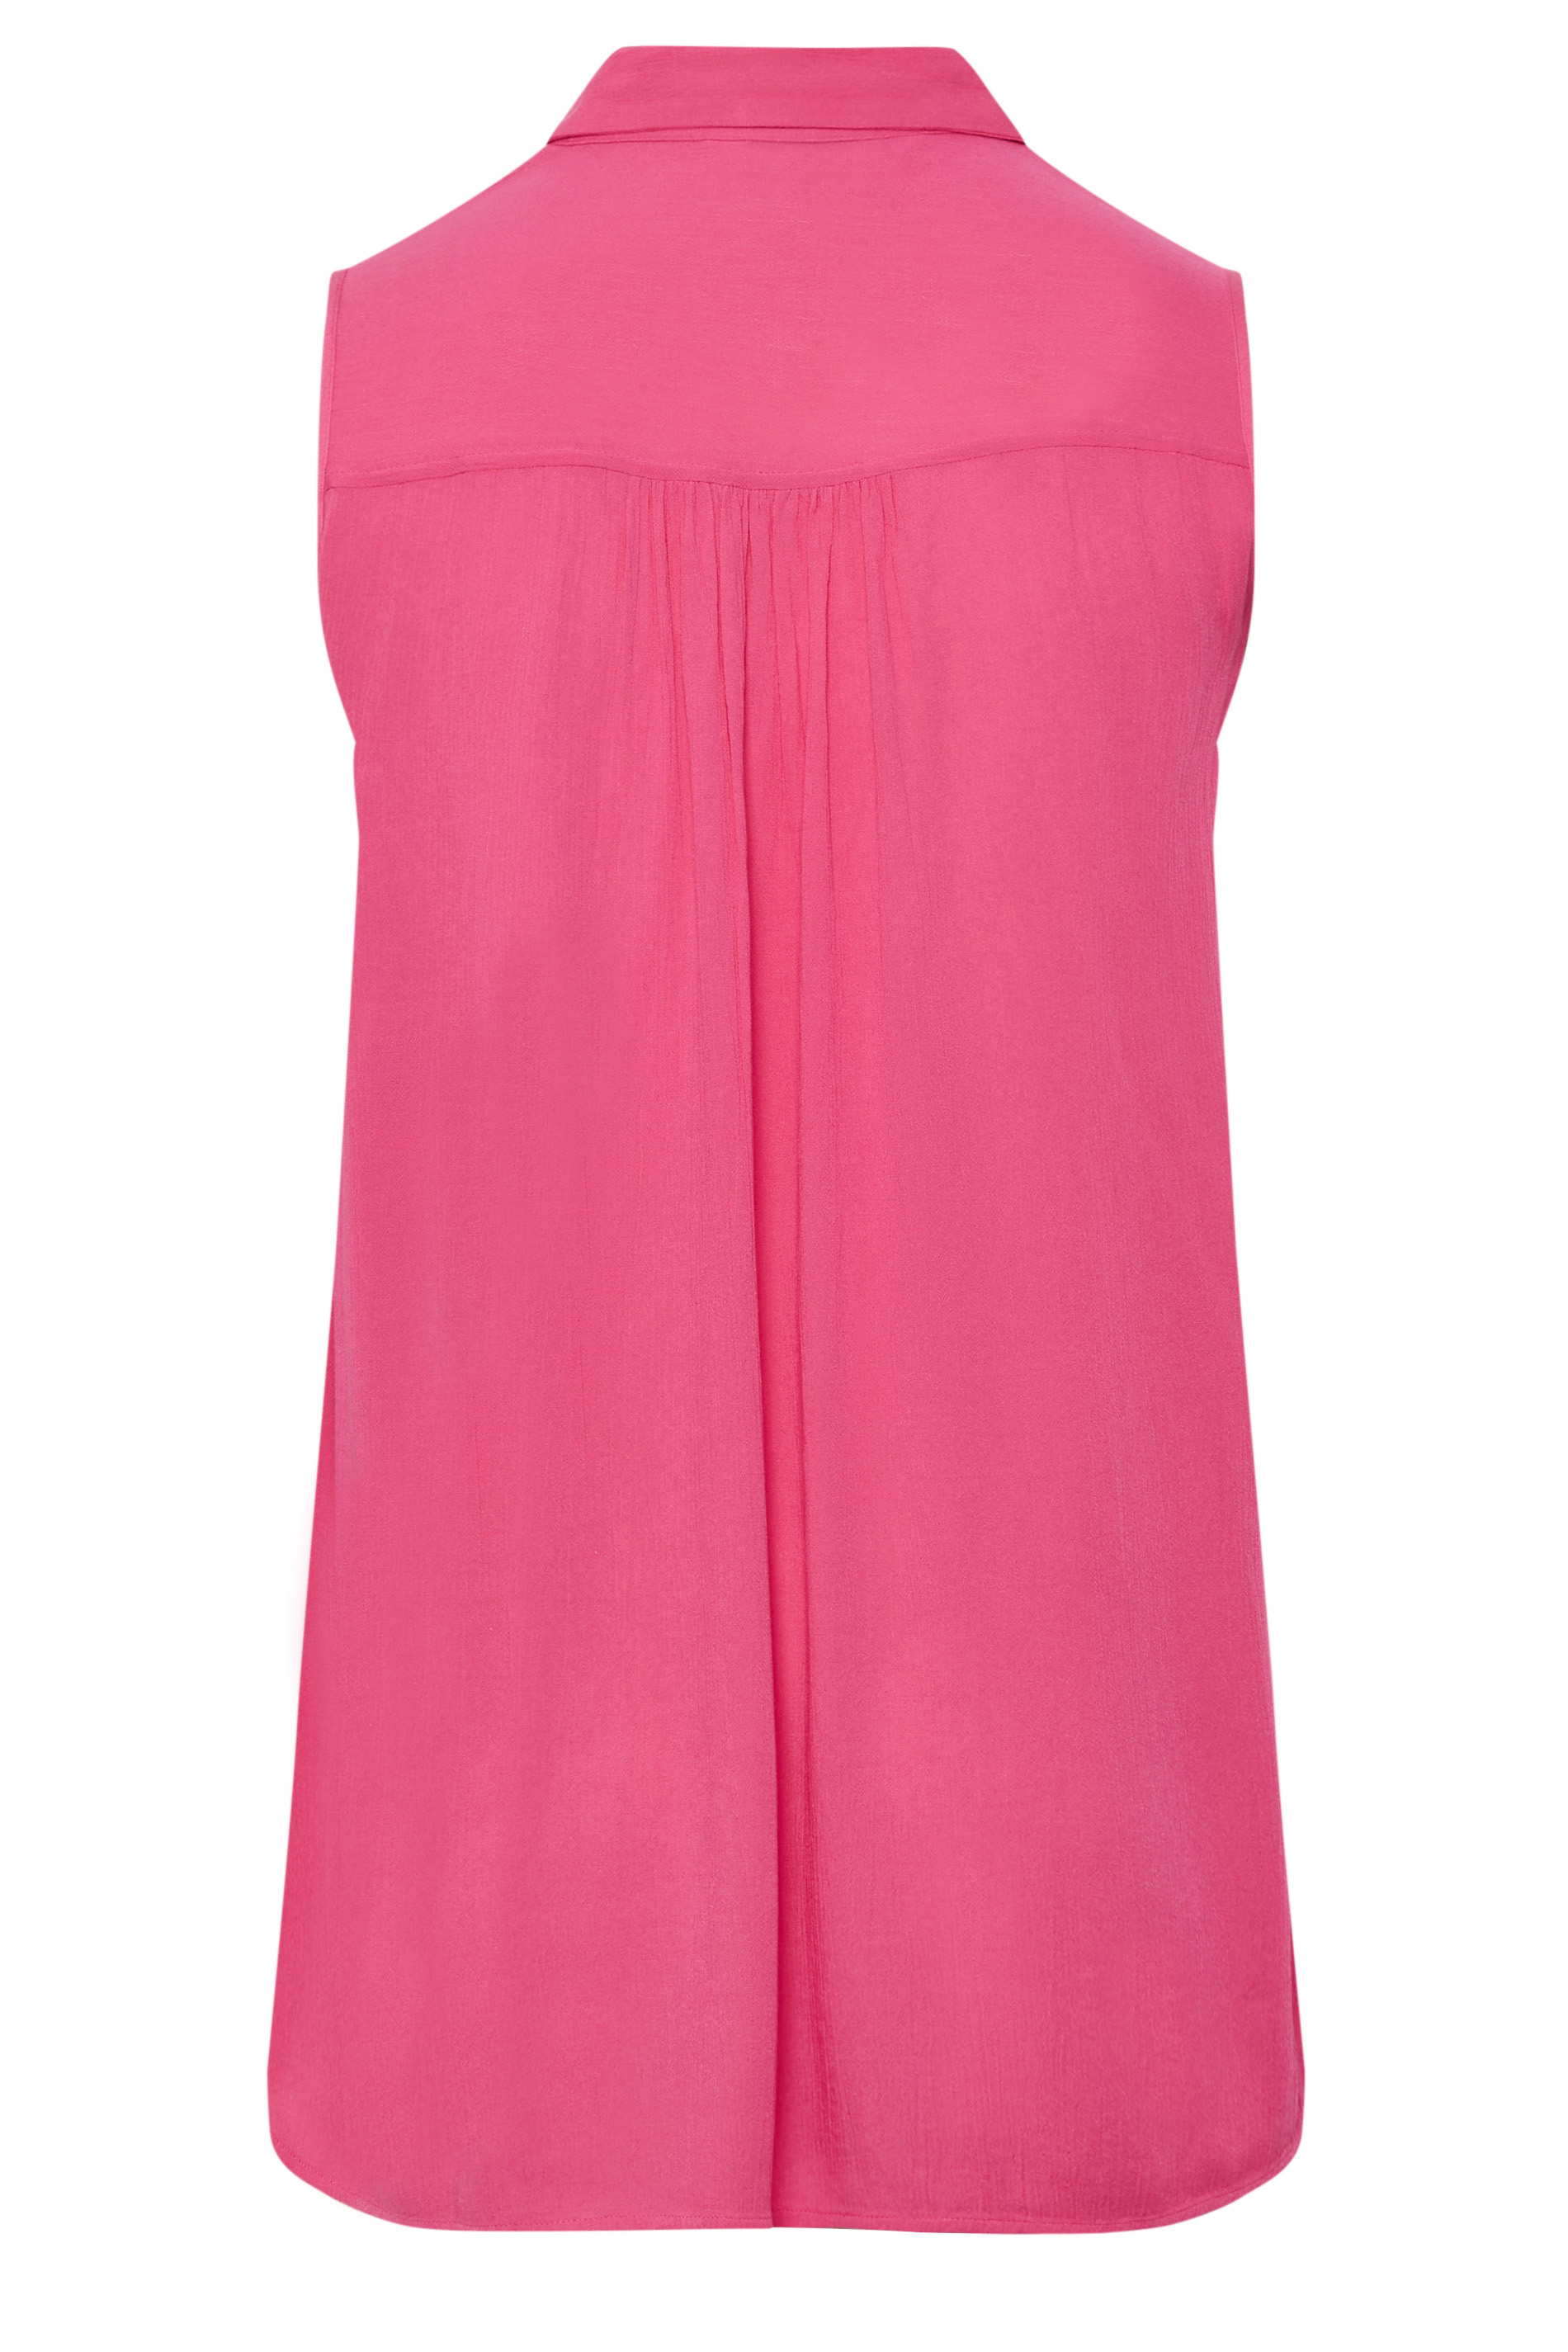 YOURS Plus Size Hot Pink Dipped Hem Sleeveless Blouse | Yours Clothing